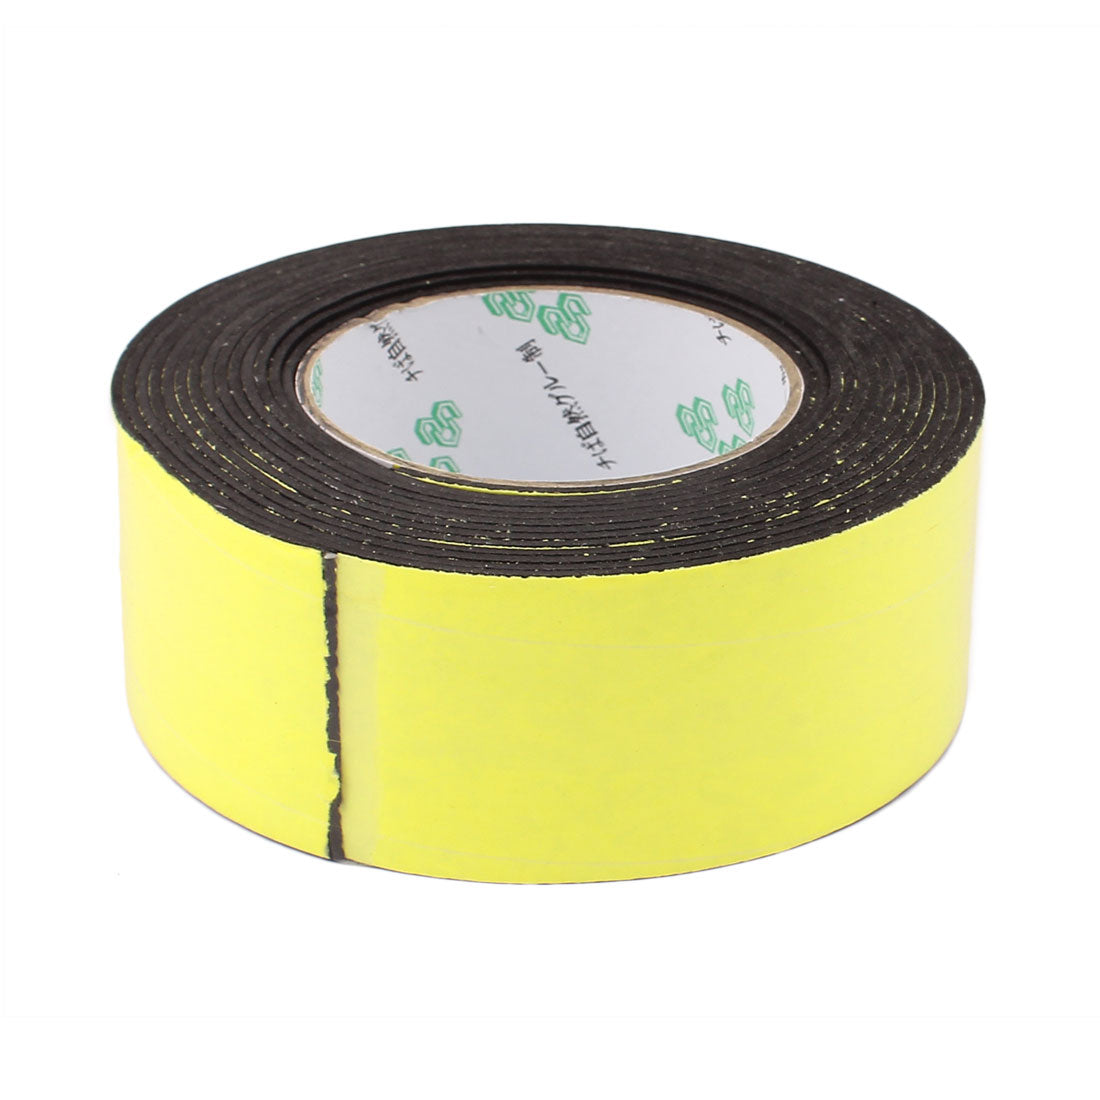 uxcell Uxcell 50mm x 2mm Single Sided Self Adhesive Shockproof Sponge Foam Tape 5M Length